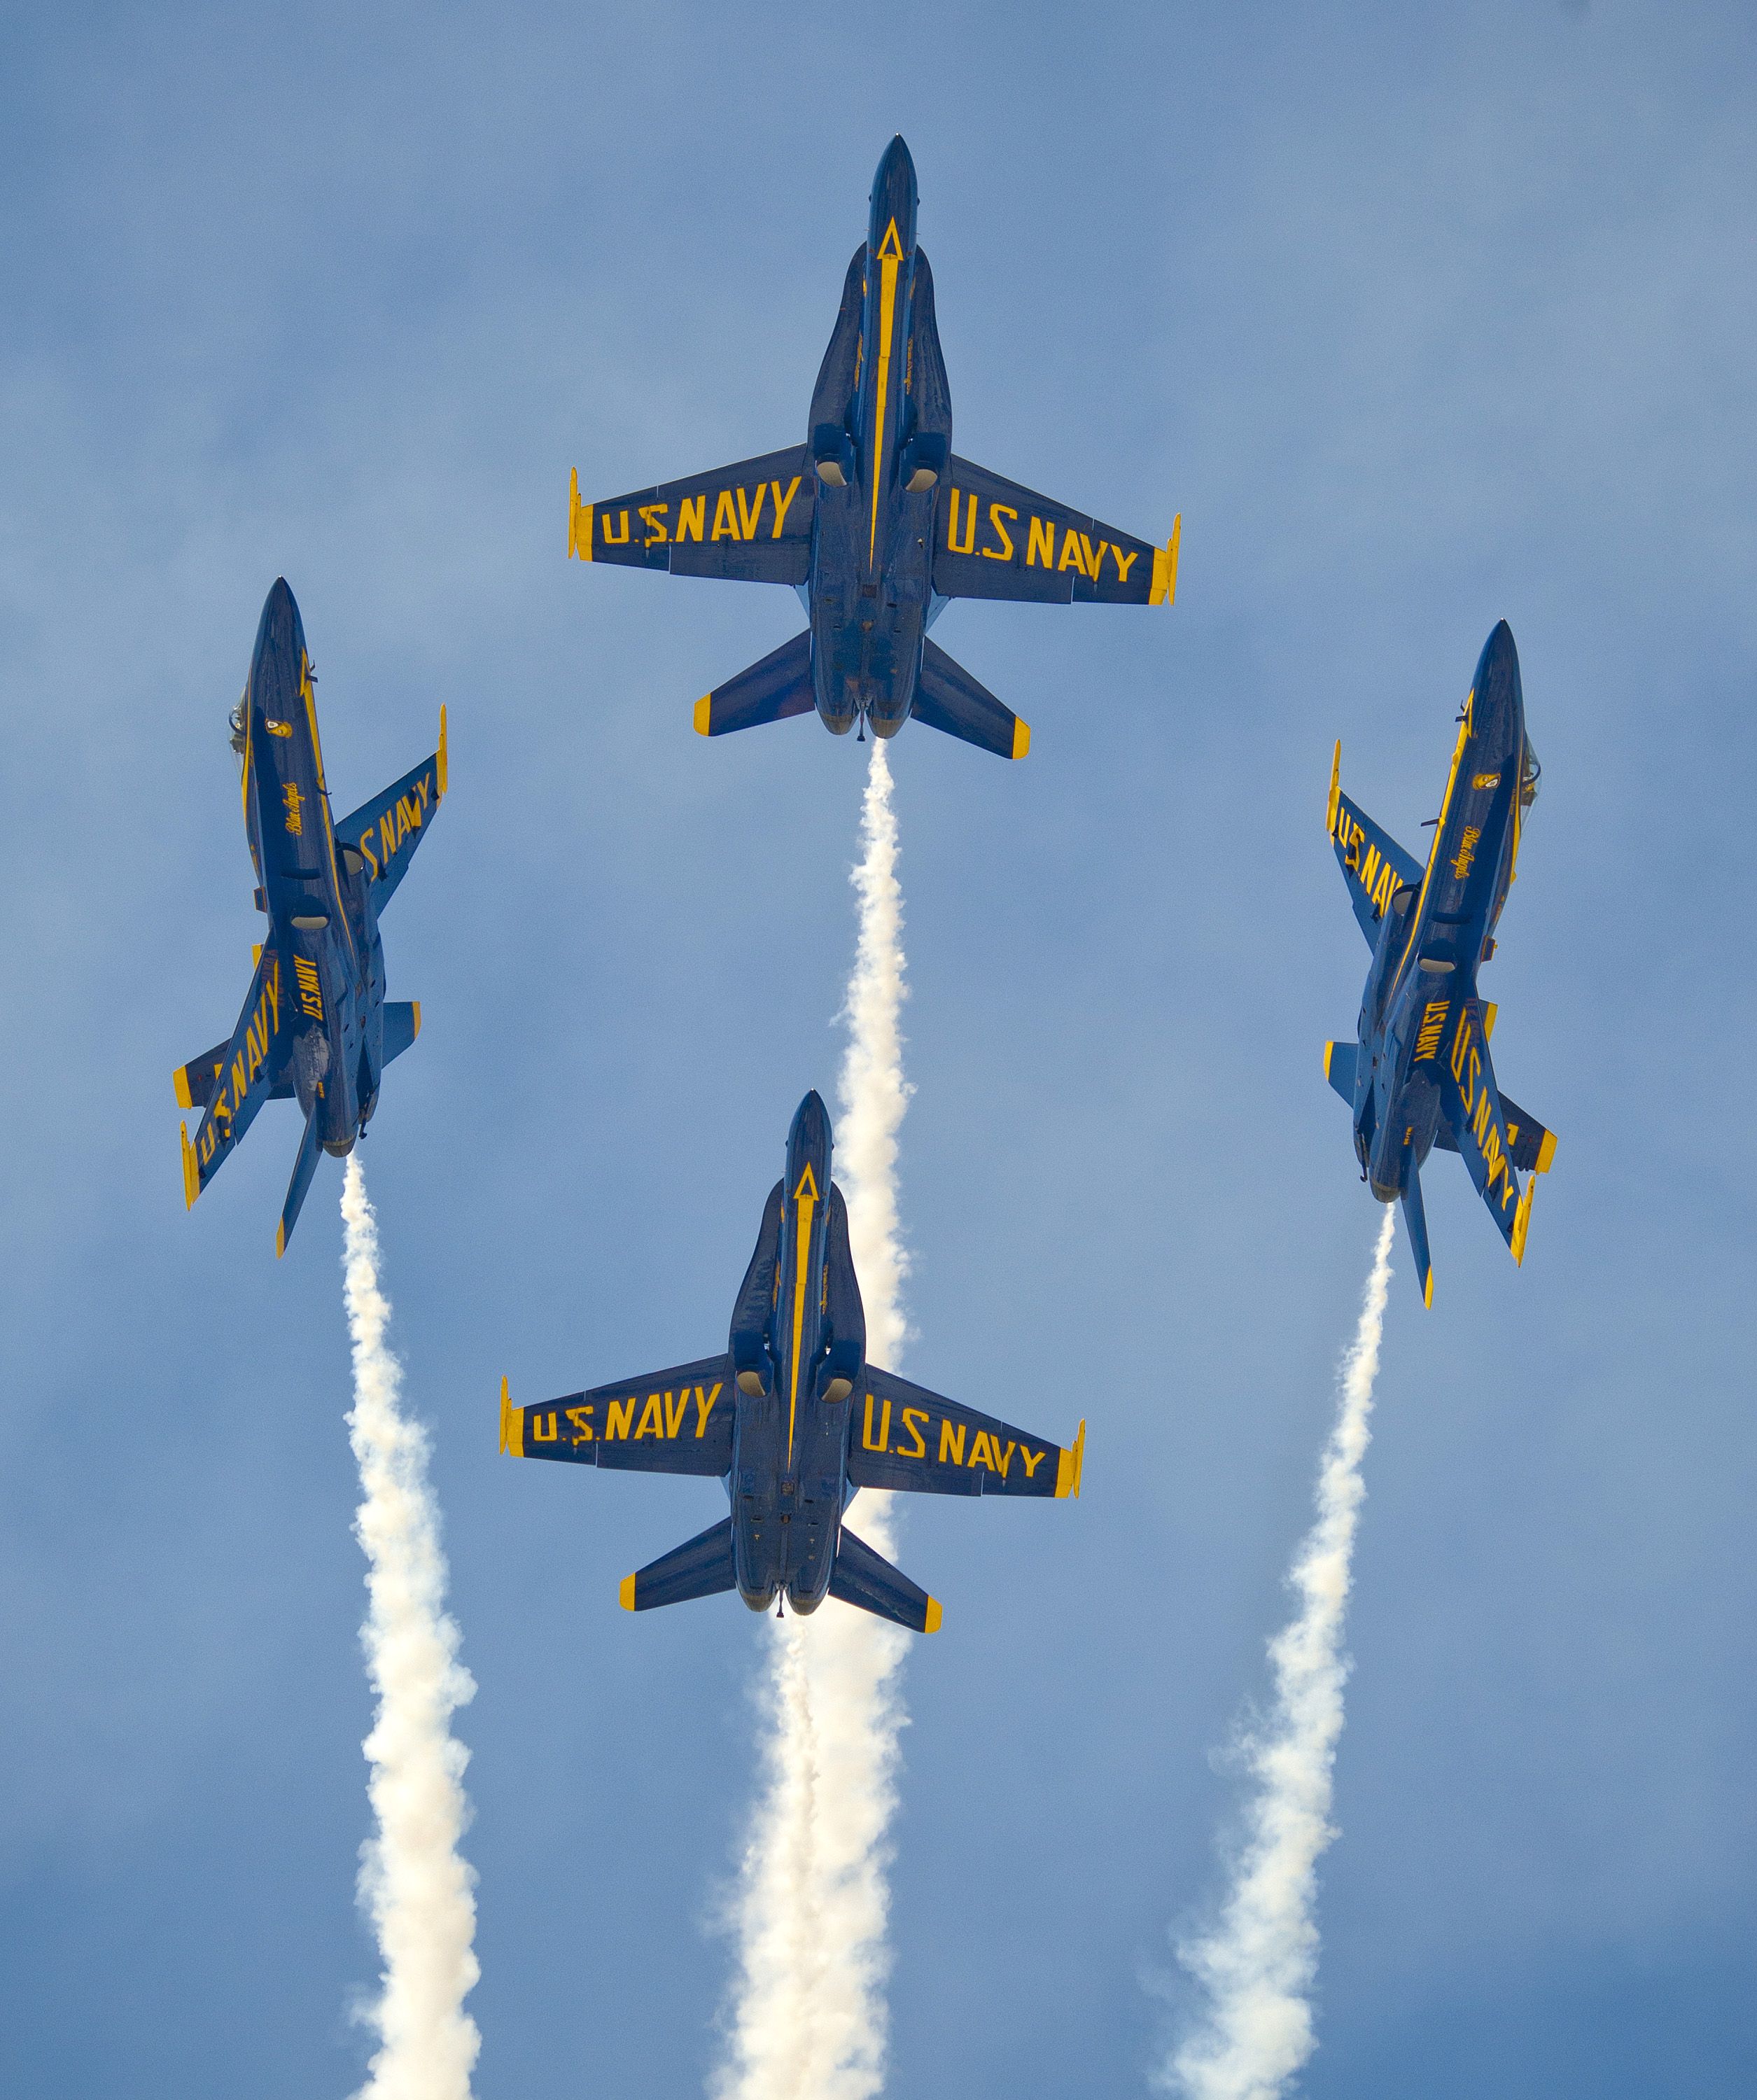 See the Blue angels √ WOW! Based in Pensacola, FL, the Blue Angels ...